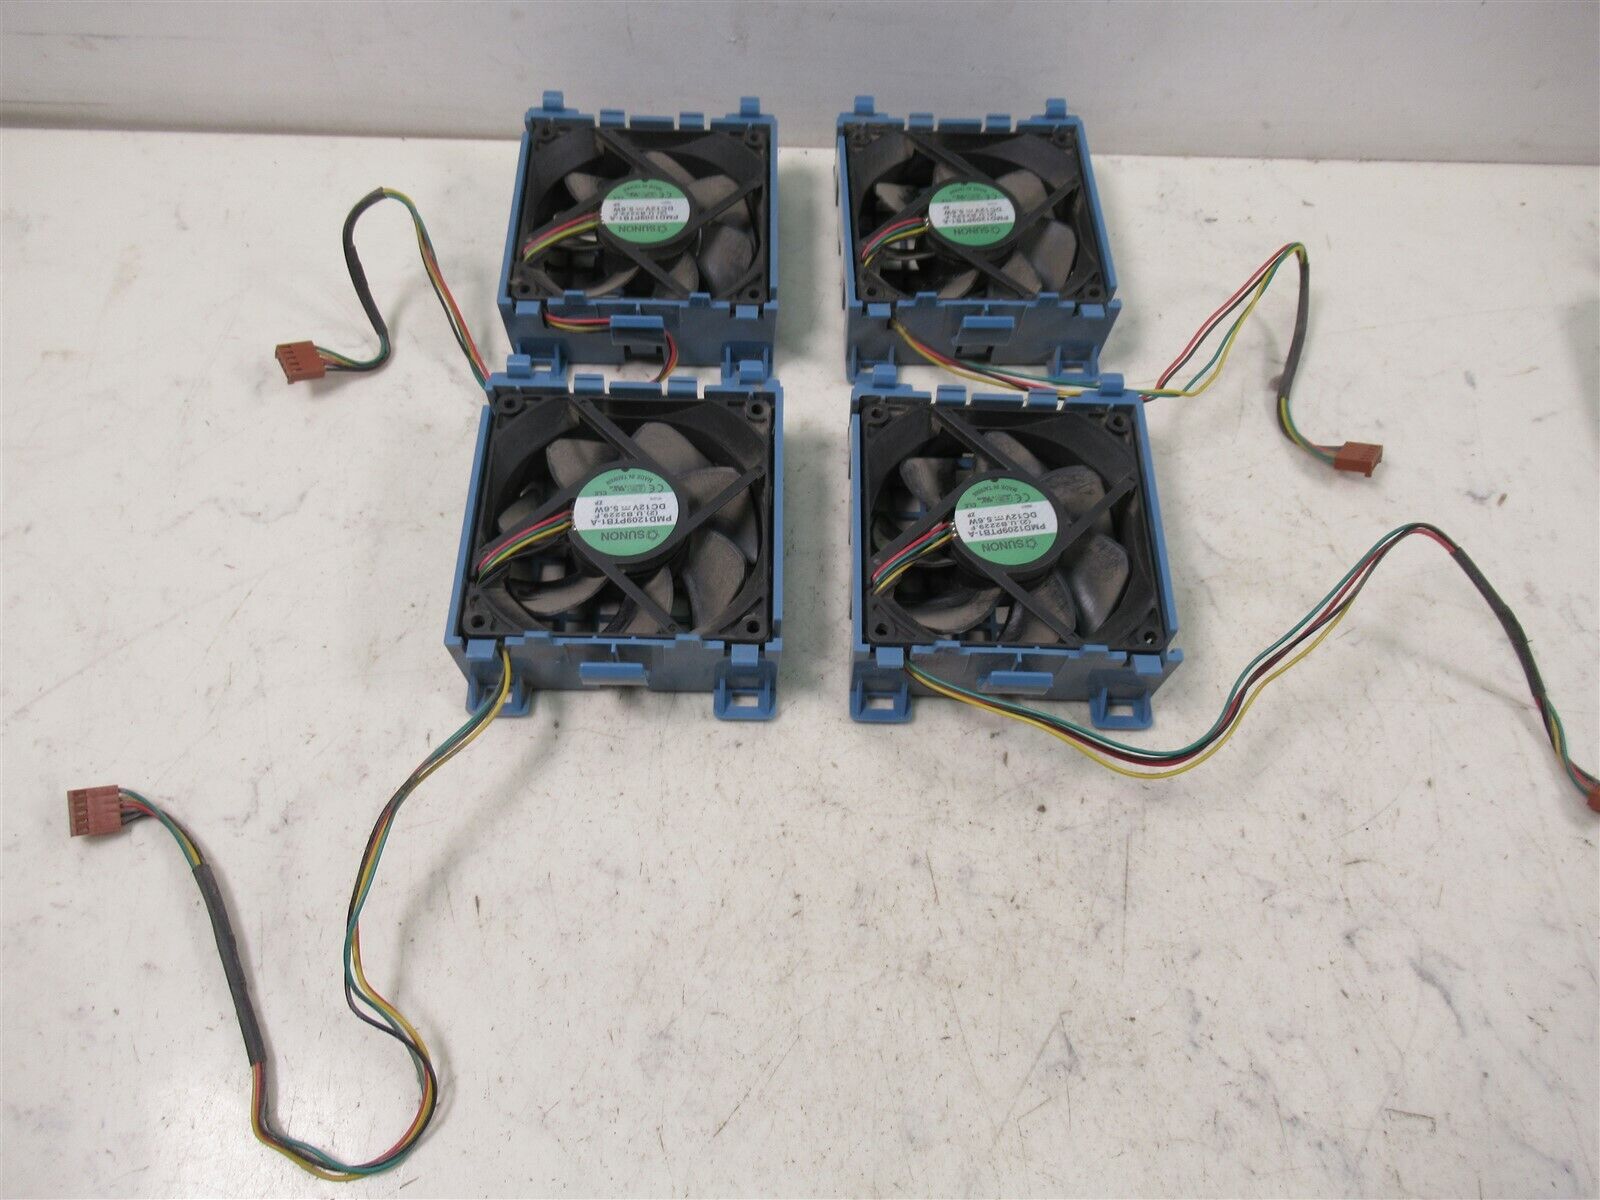 Lot of 4 Sunon PMD1209PTB1-A Cooling Fans for Computer Server 